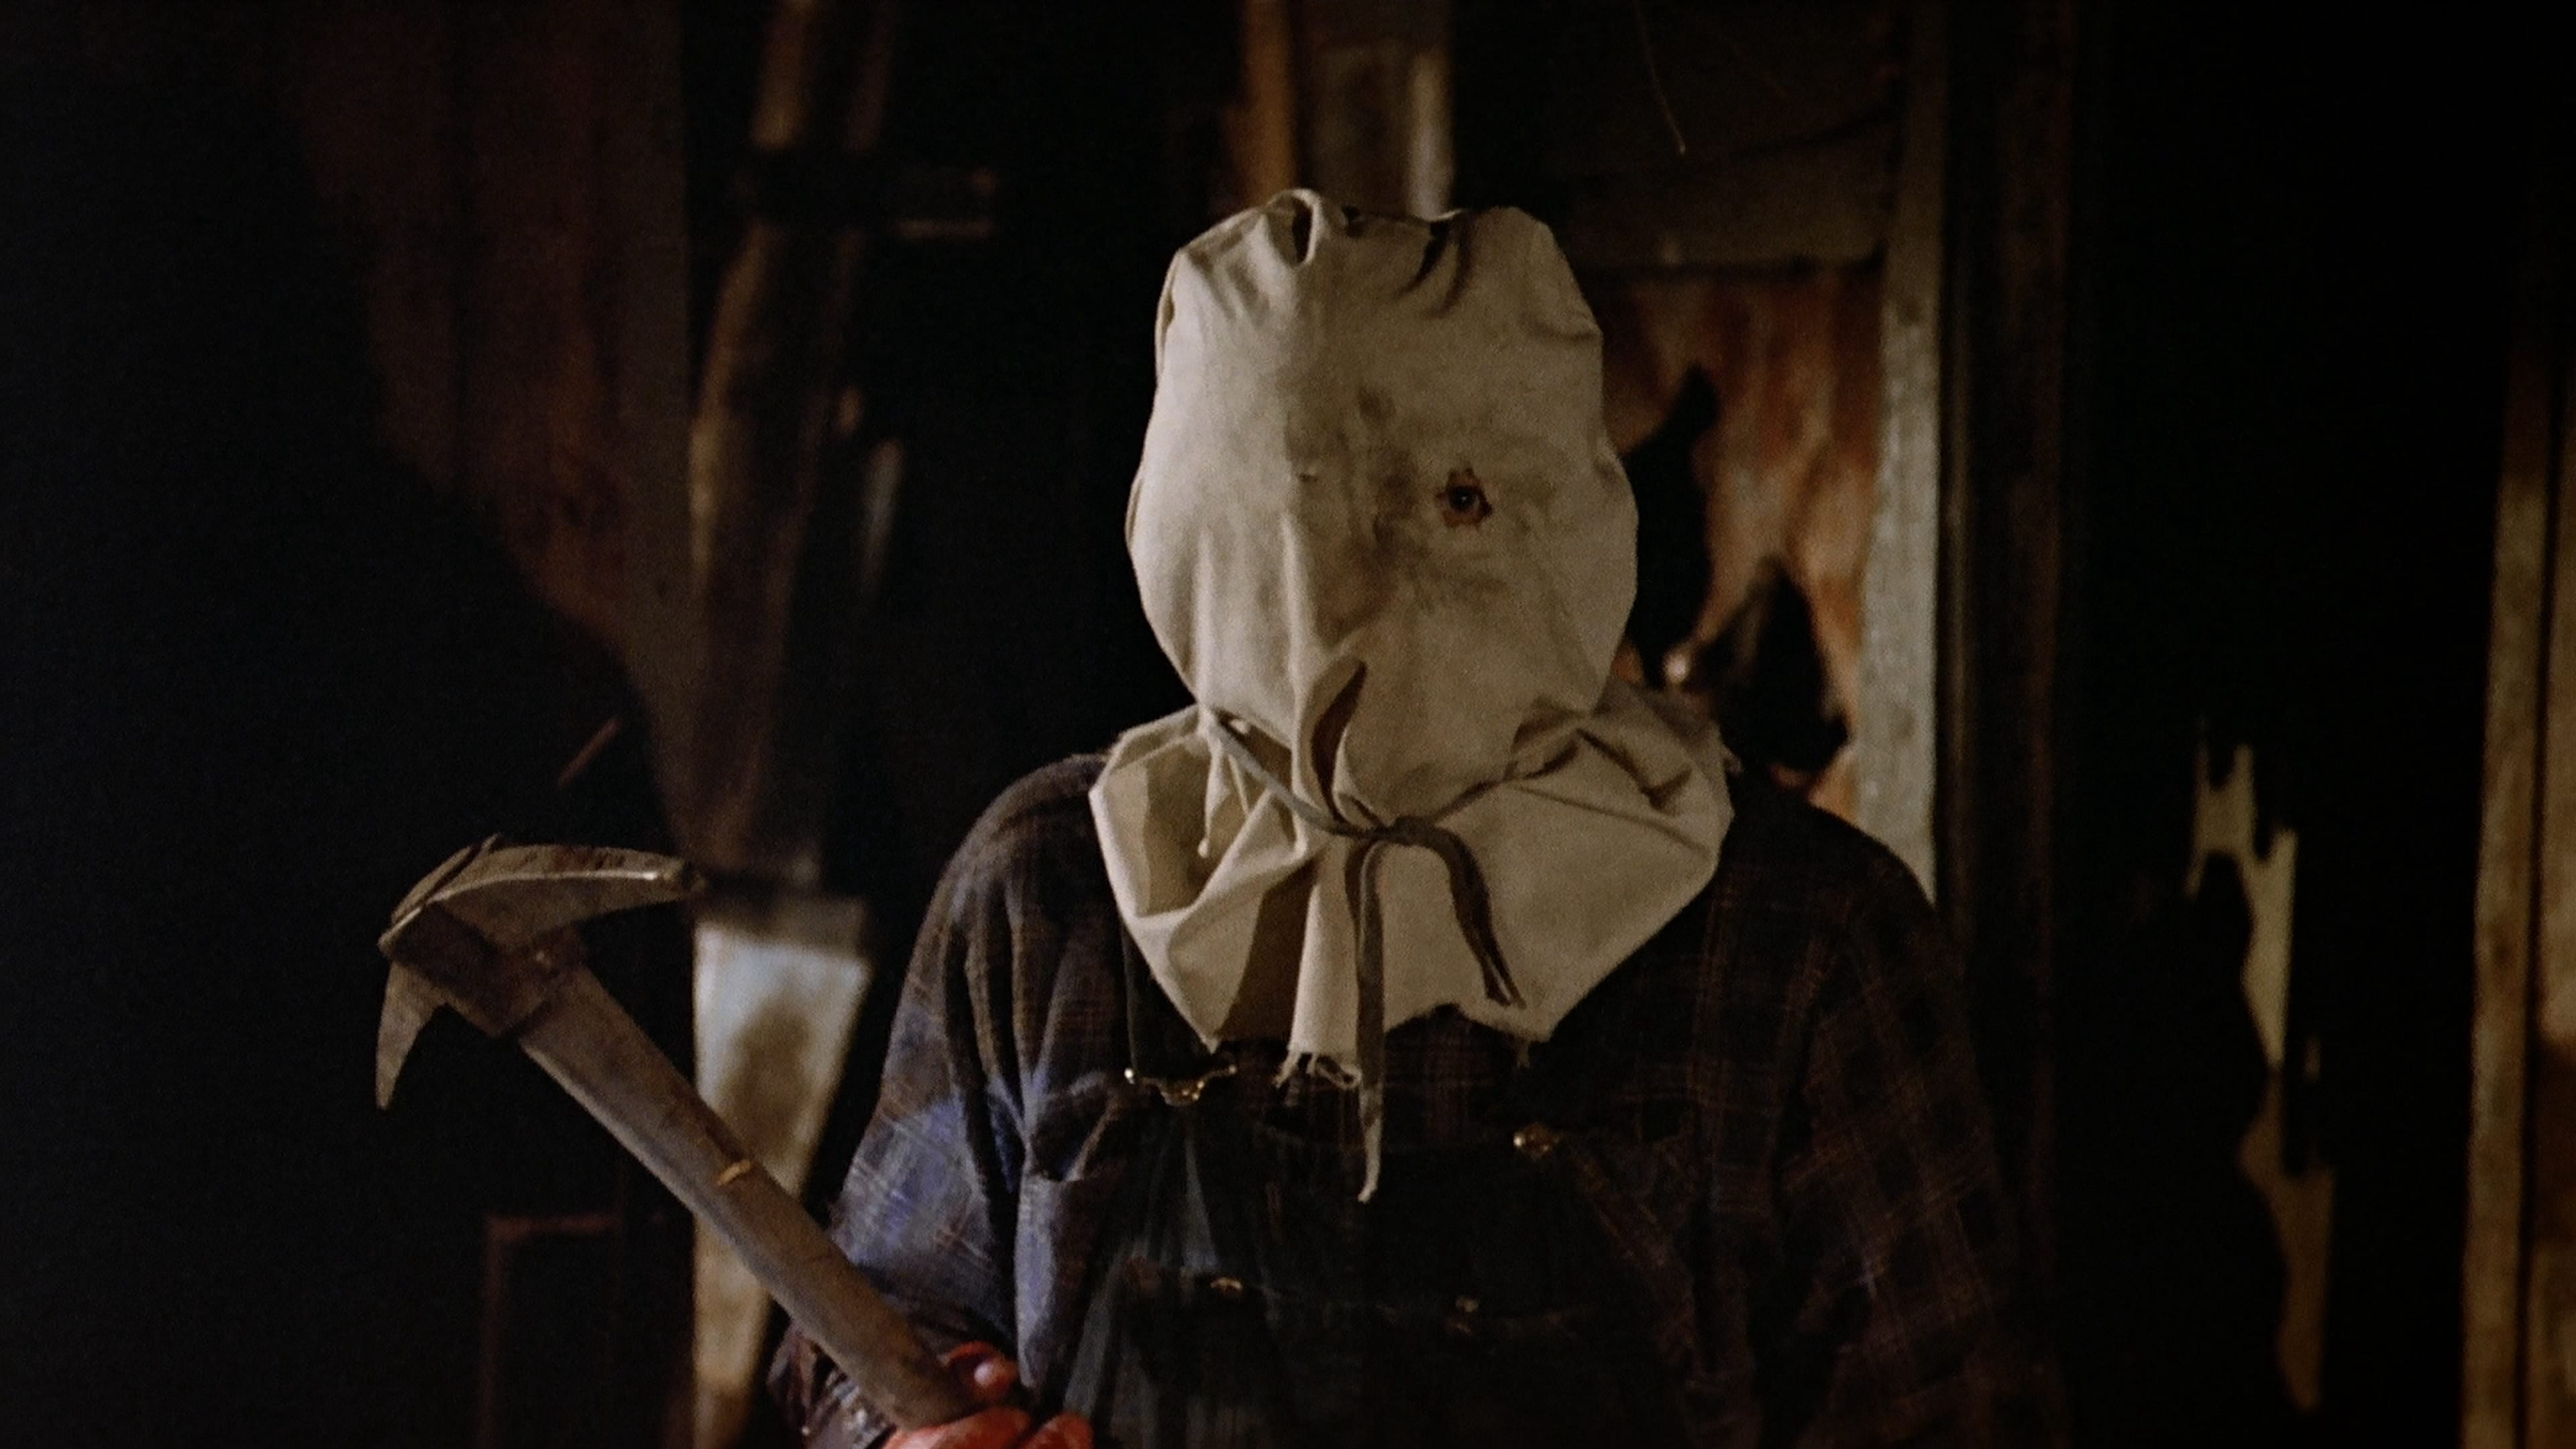 Friday the 13th Part 2 / Friday the 13th Part 2 (1981)